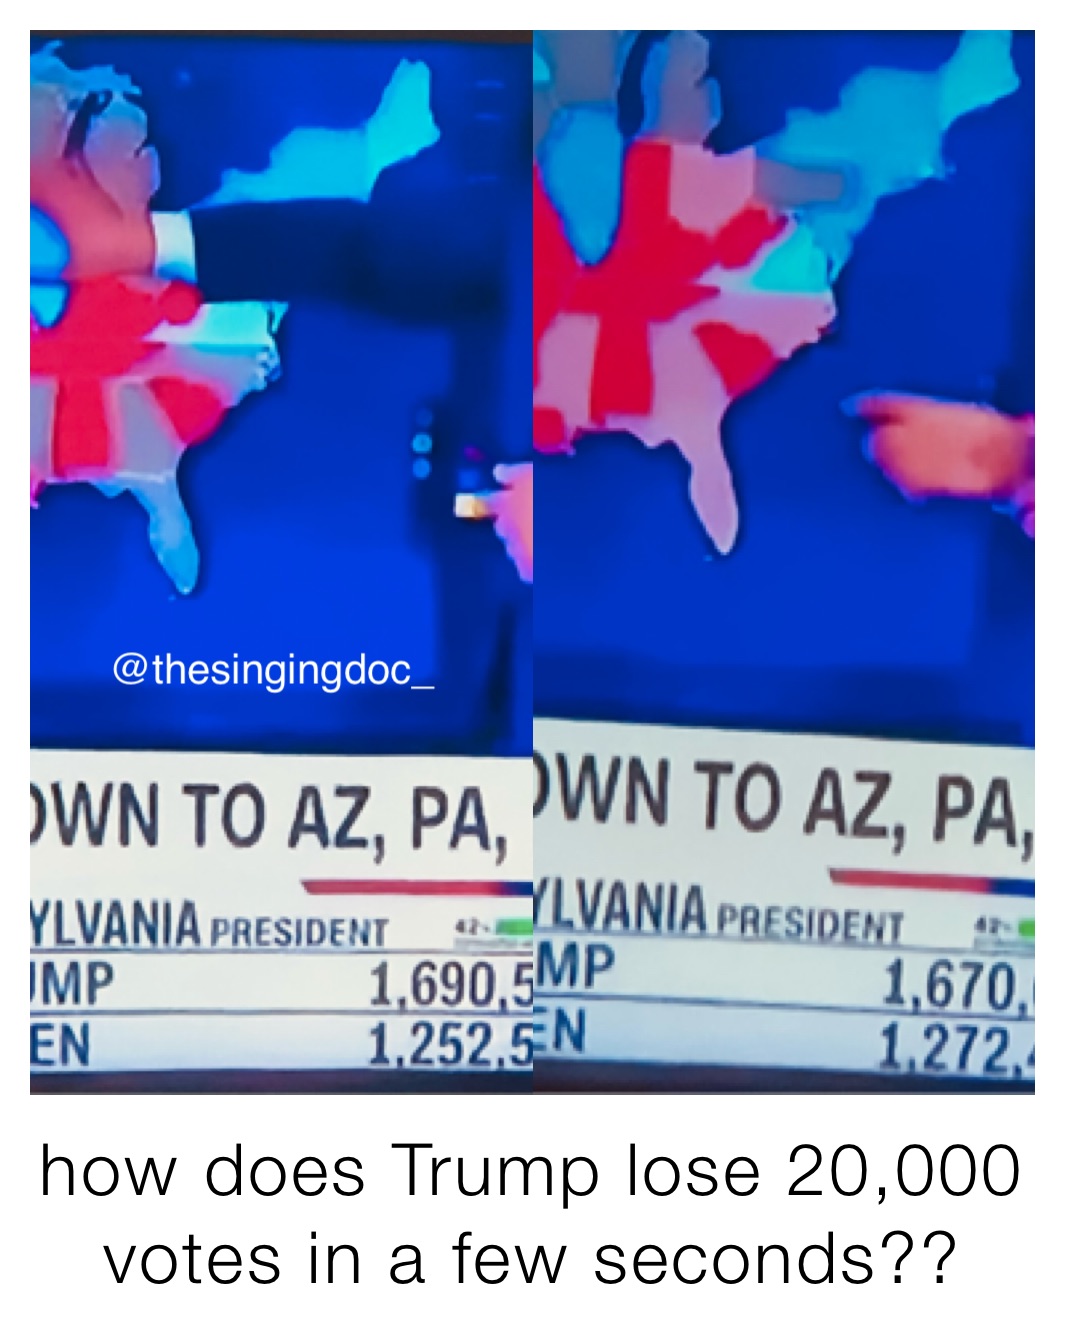 how does Trump lose 20,000 votes in a few seconds??